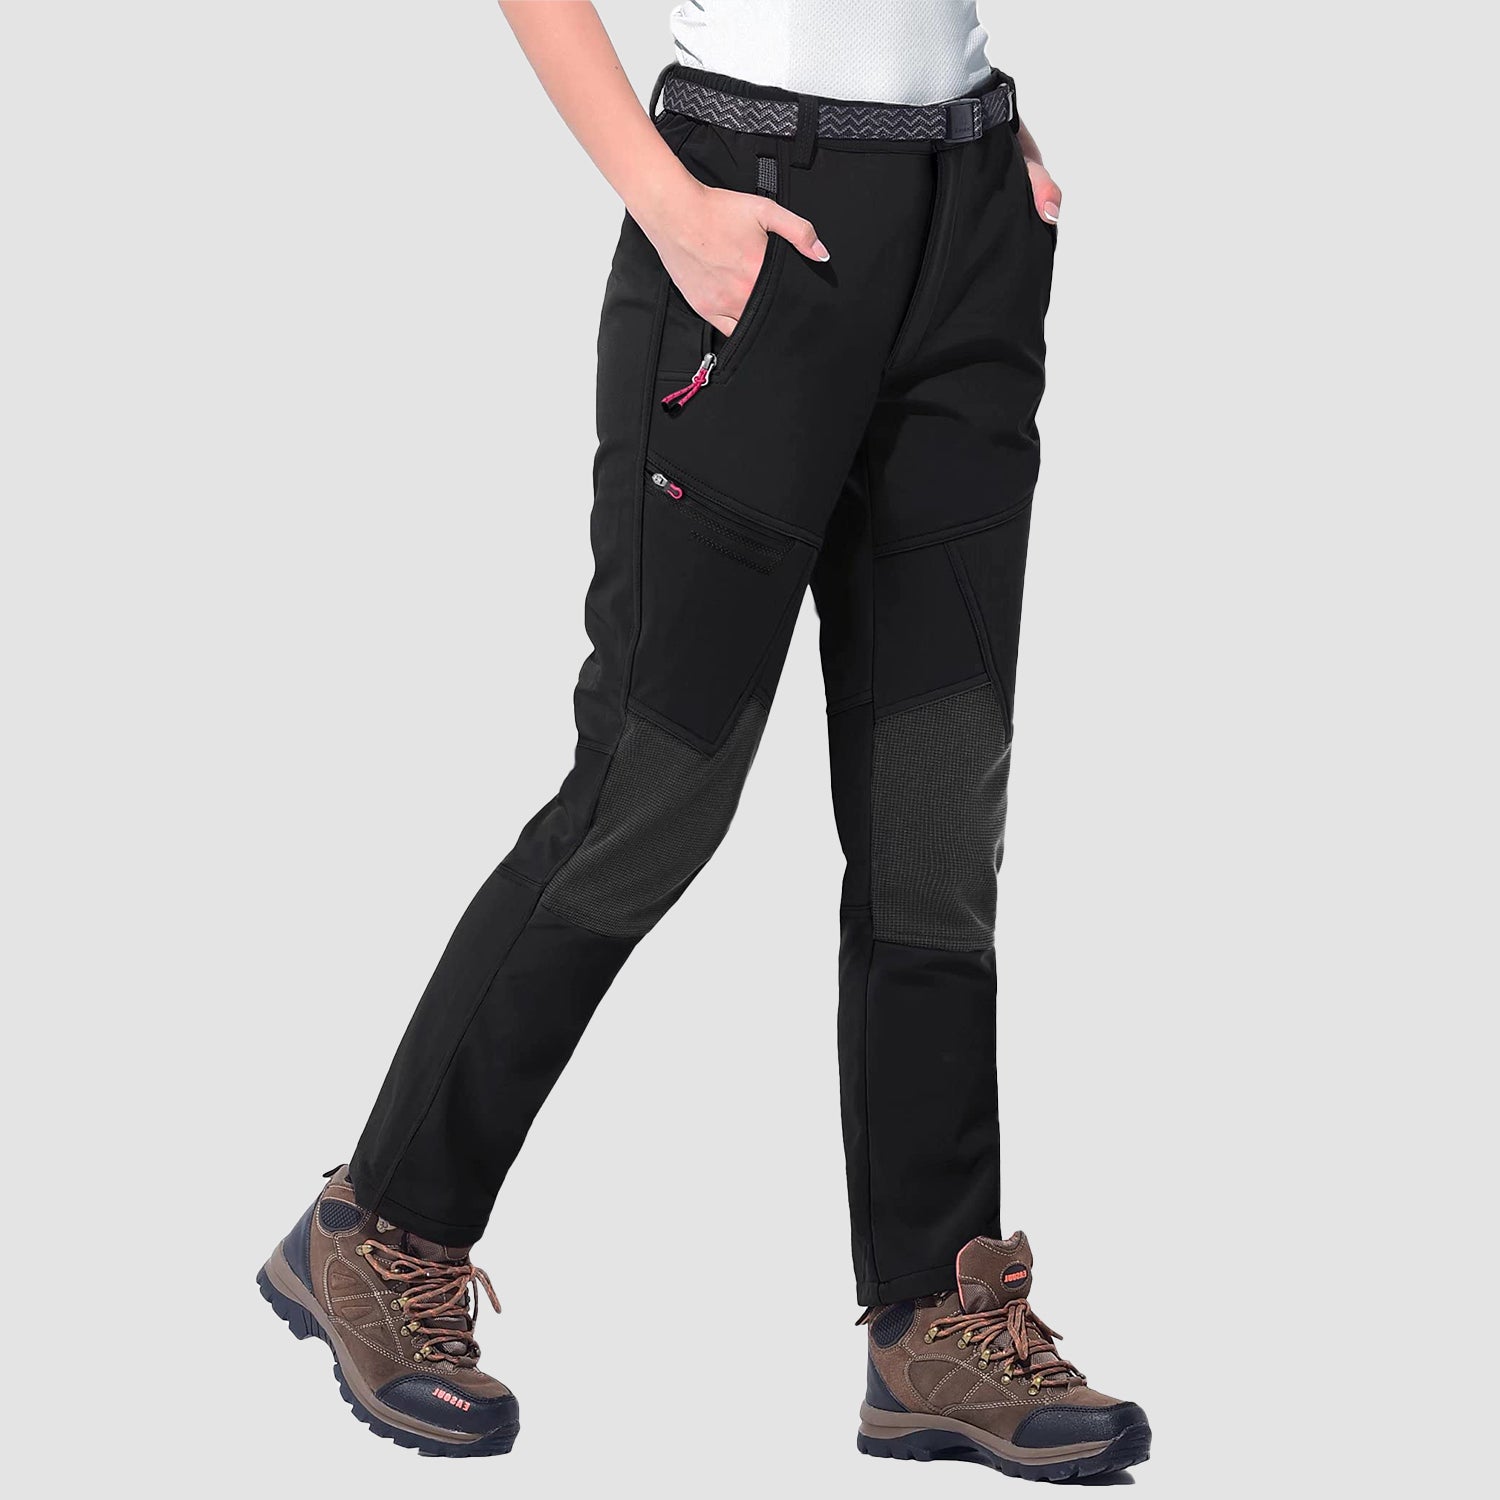 Daily Irene lined winter trousers - Navy 29